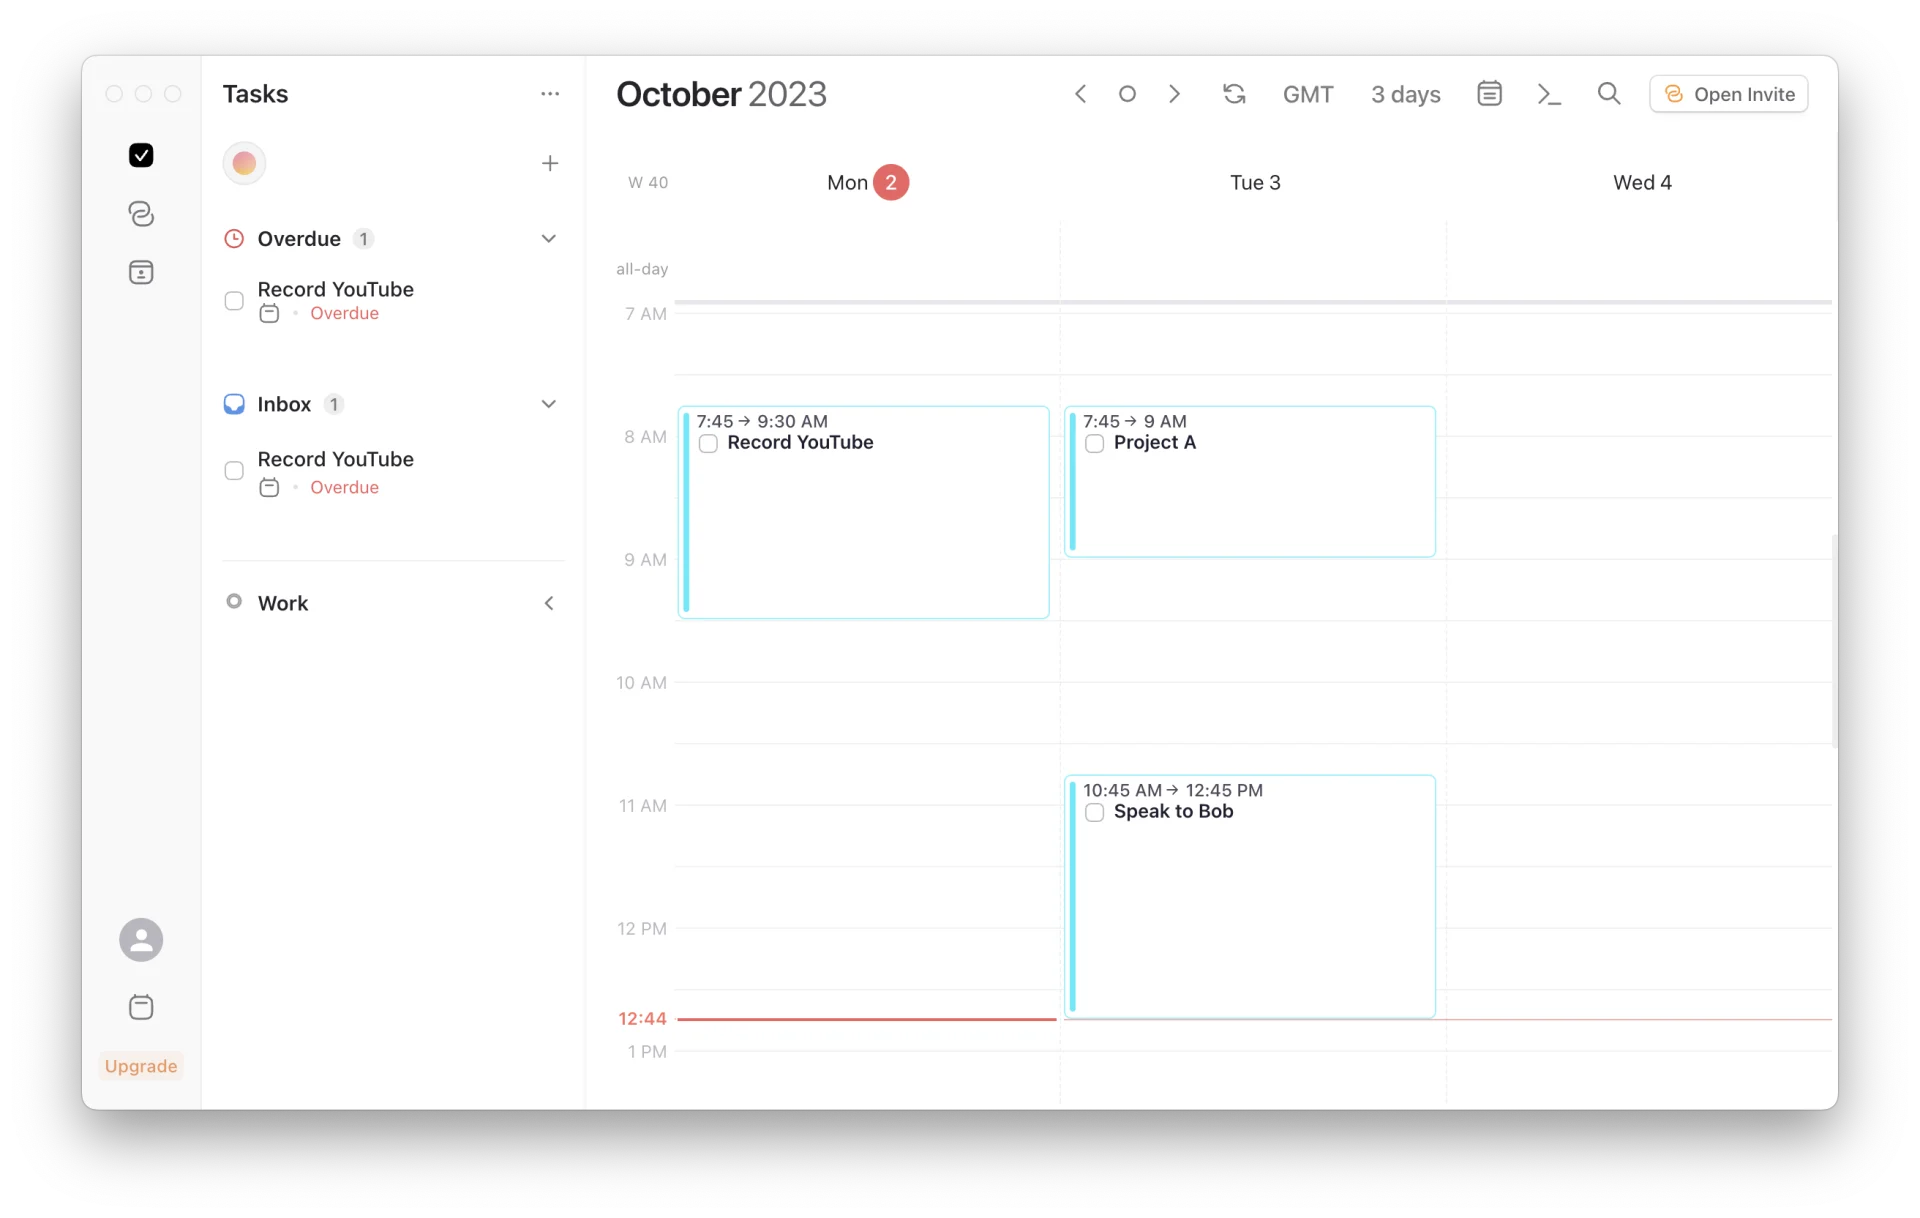 Handle tasks and calendar in one with Morgen Calendar